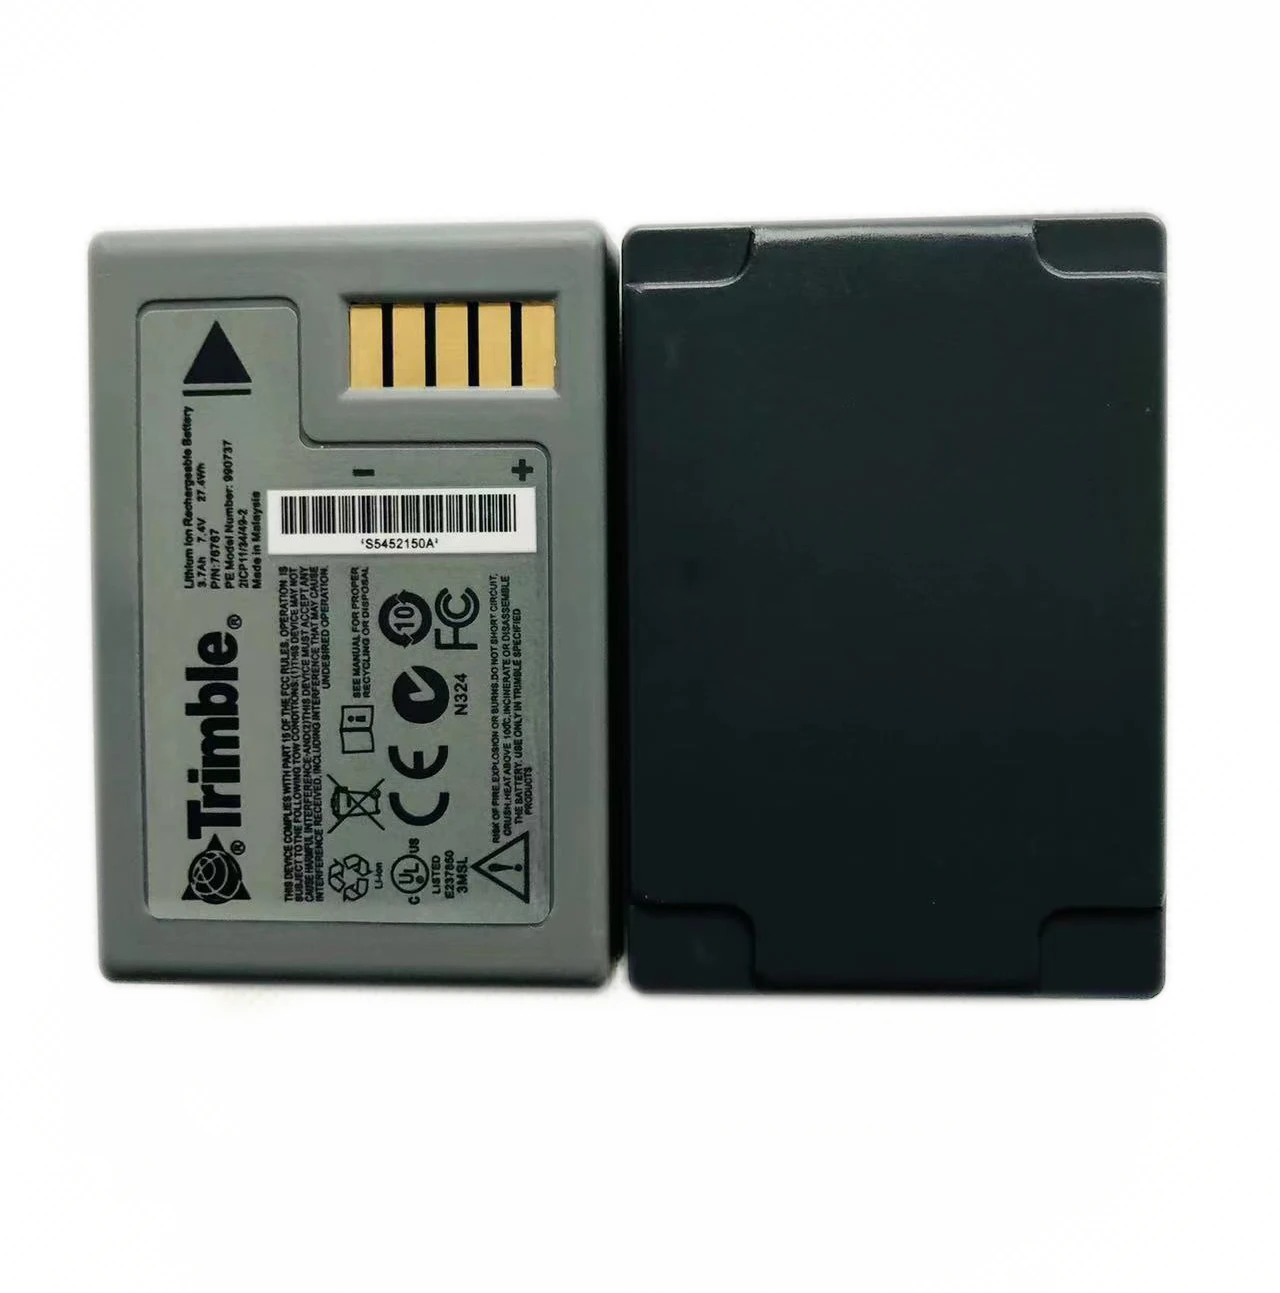 Brand New Replacement R10 Battery for Trimble R10 GPS RTK Receiver Battery 7.4V 3700mah li-ion Battery 18650.00 for connect trimble 5700 5800 r7 host to data collector cable 31288 02 brand new data cable 31288 02